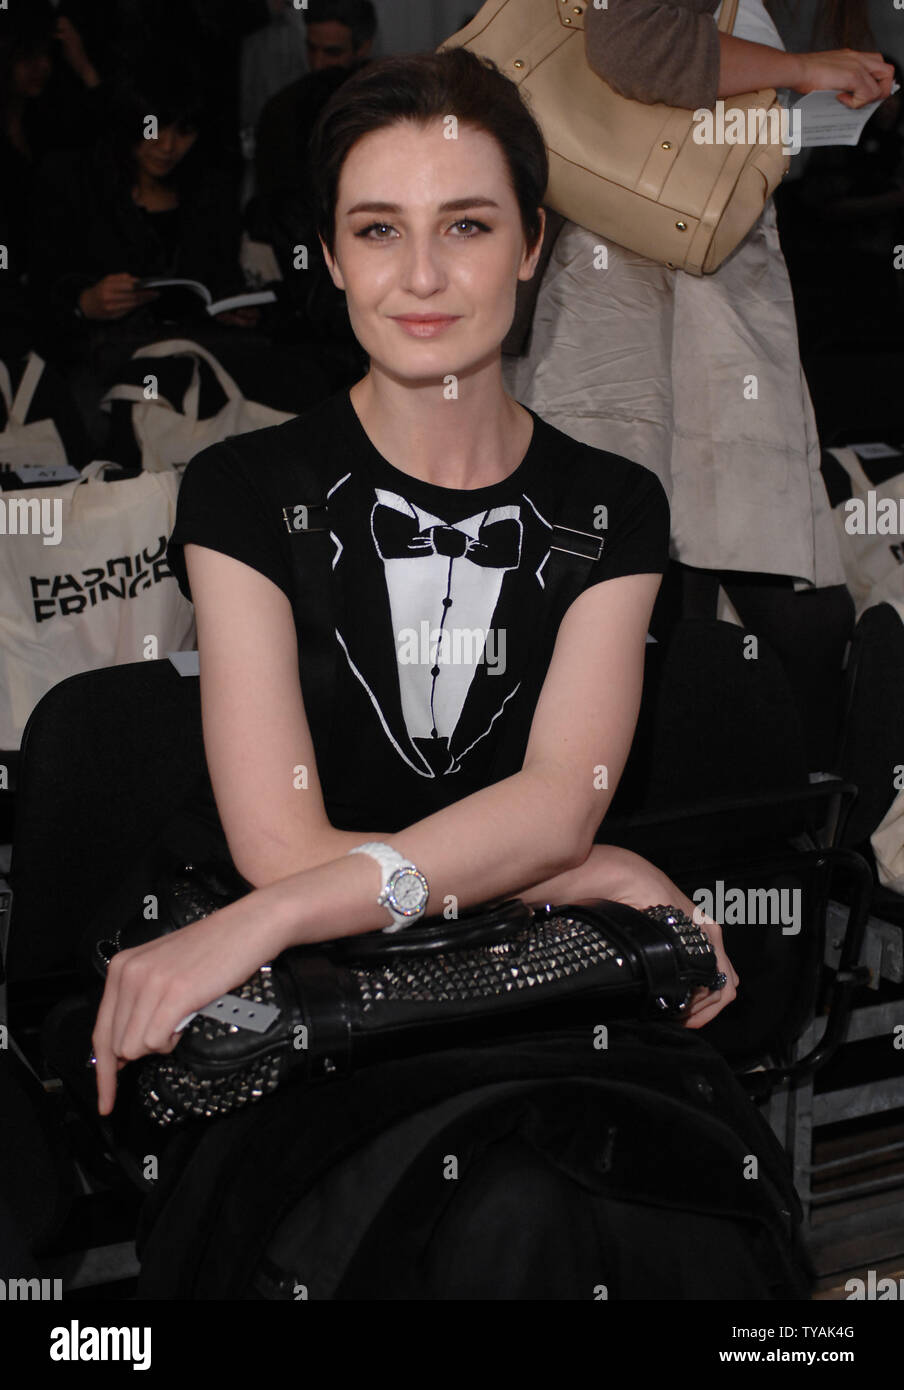 British model Erin O'Connor attends Fashion Fringe's Spring/Summer collection at London Fashion Week in London on September 20, 2007.  (UPI Photo/Rune Hellestad) Stock Photo